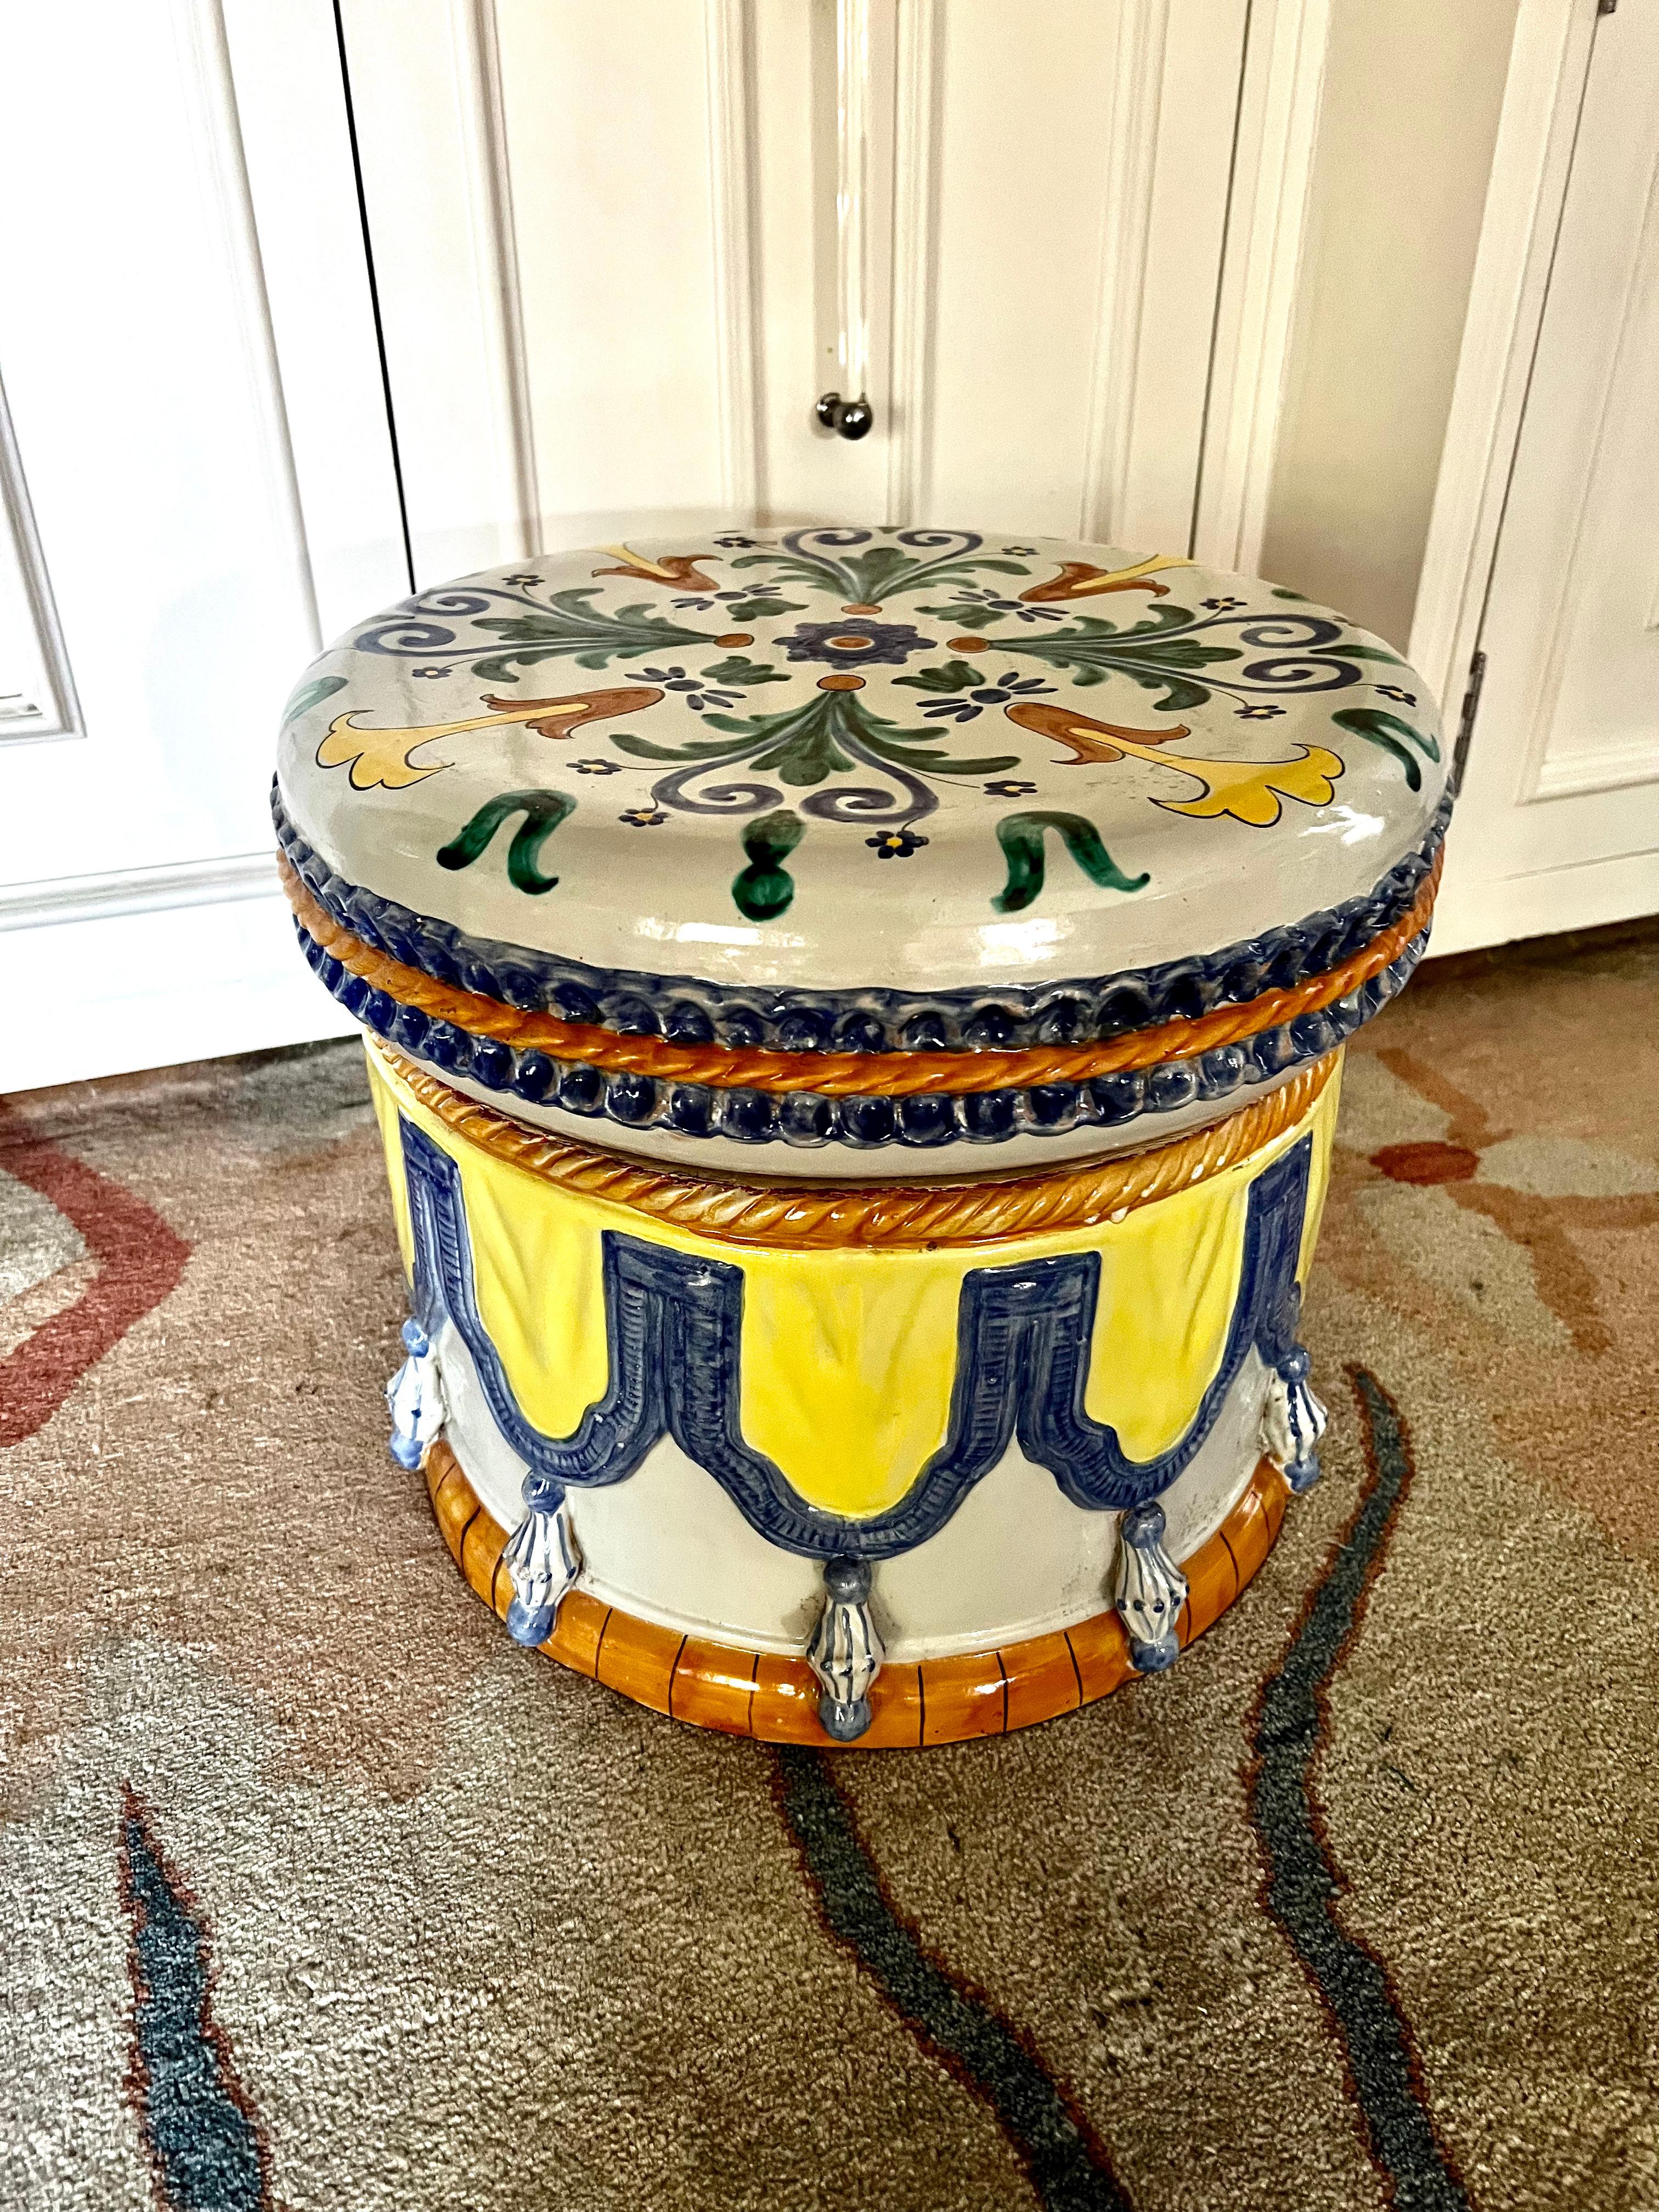 A wonderfully handcrafted garden or interior stool. Hand painted terracotta / ceramic. A compliment to many settings, especially those in the garden - a whimsical style that represents fine Italian pottery craftsmanship.

The top comes off for